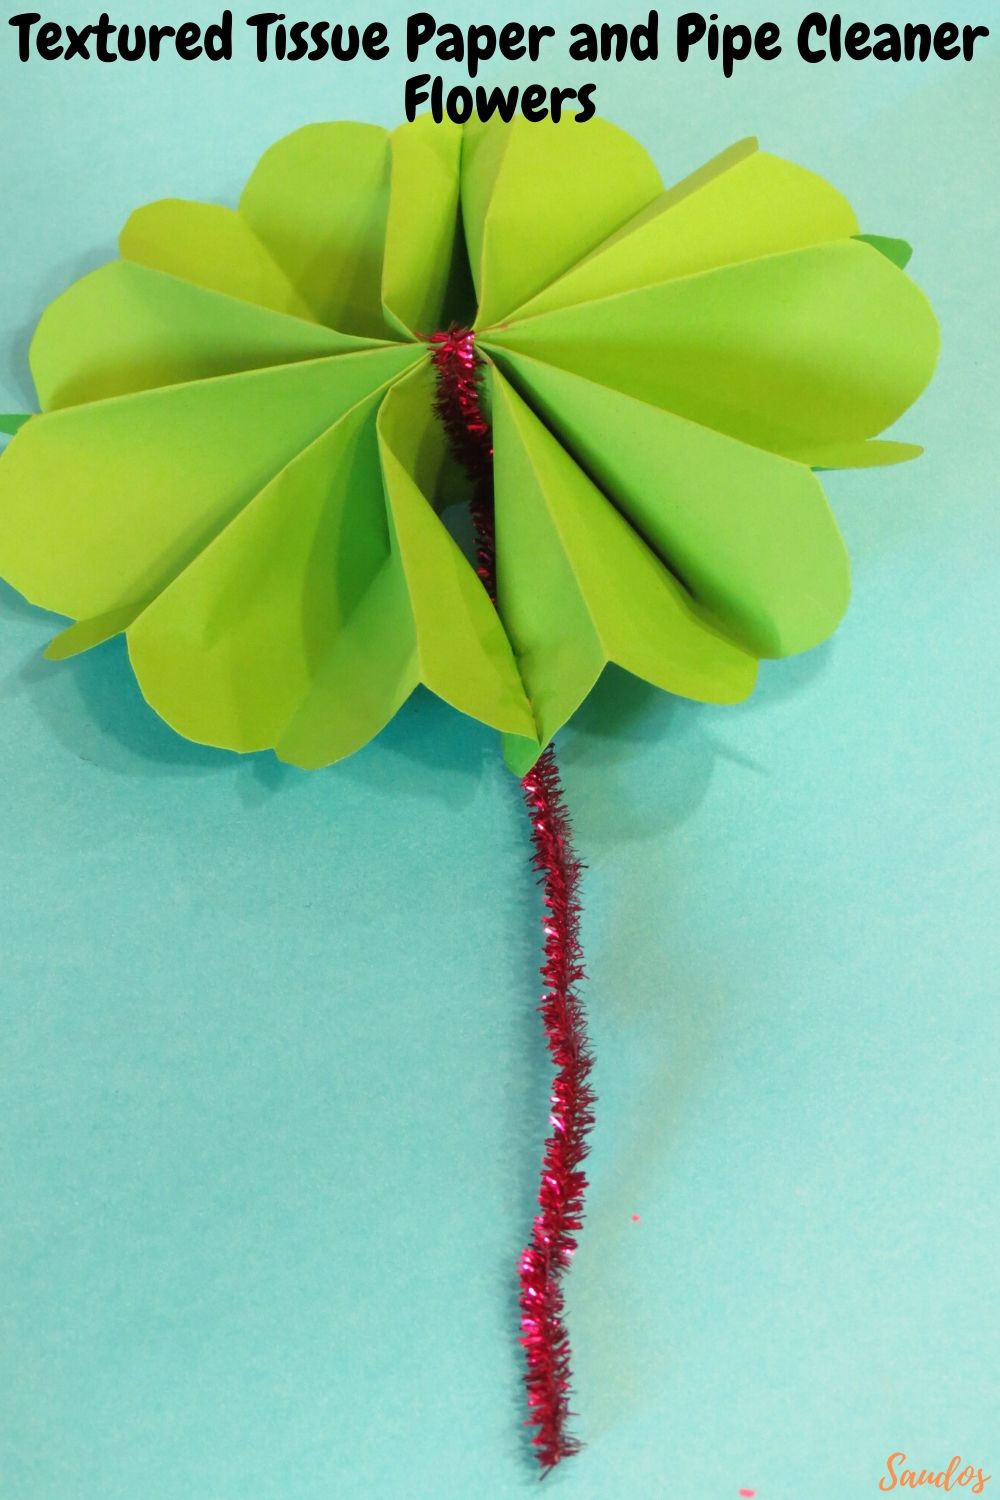 Textured Tissue Paper and Pipe Cleaner Flowers